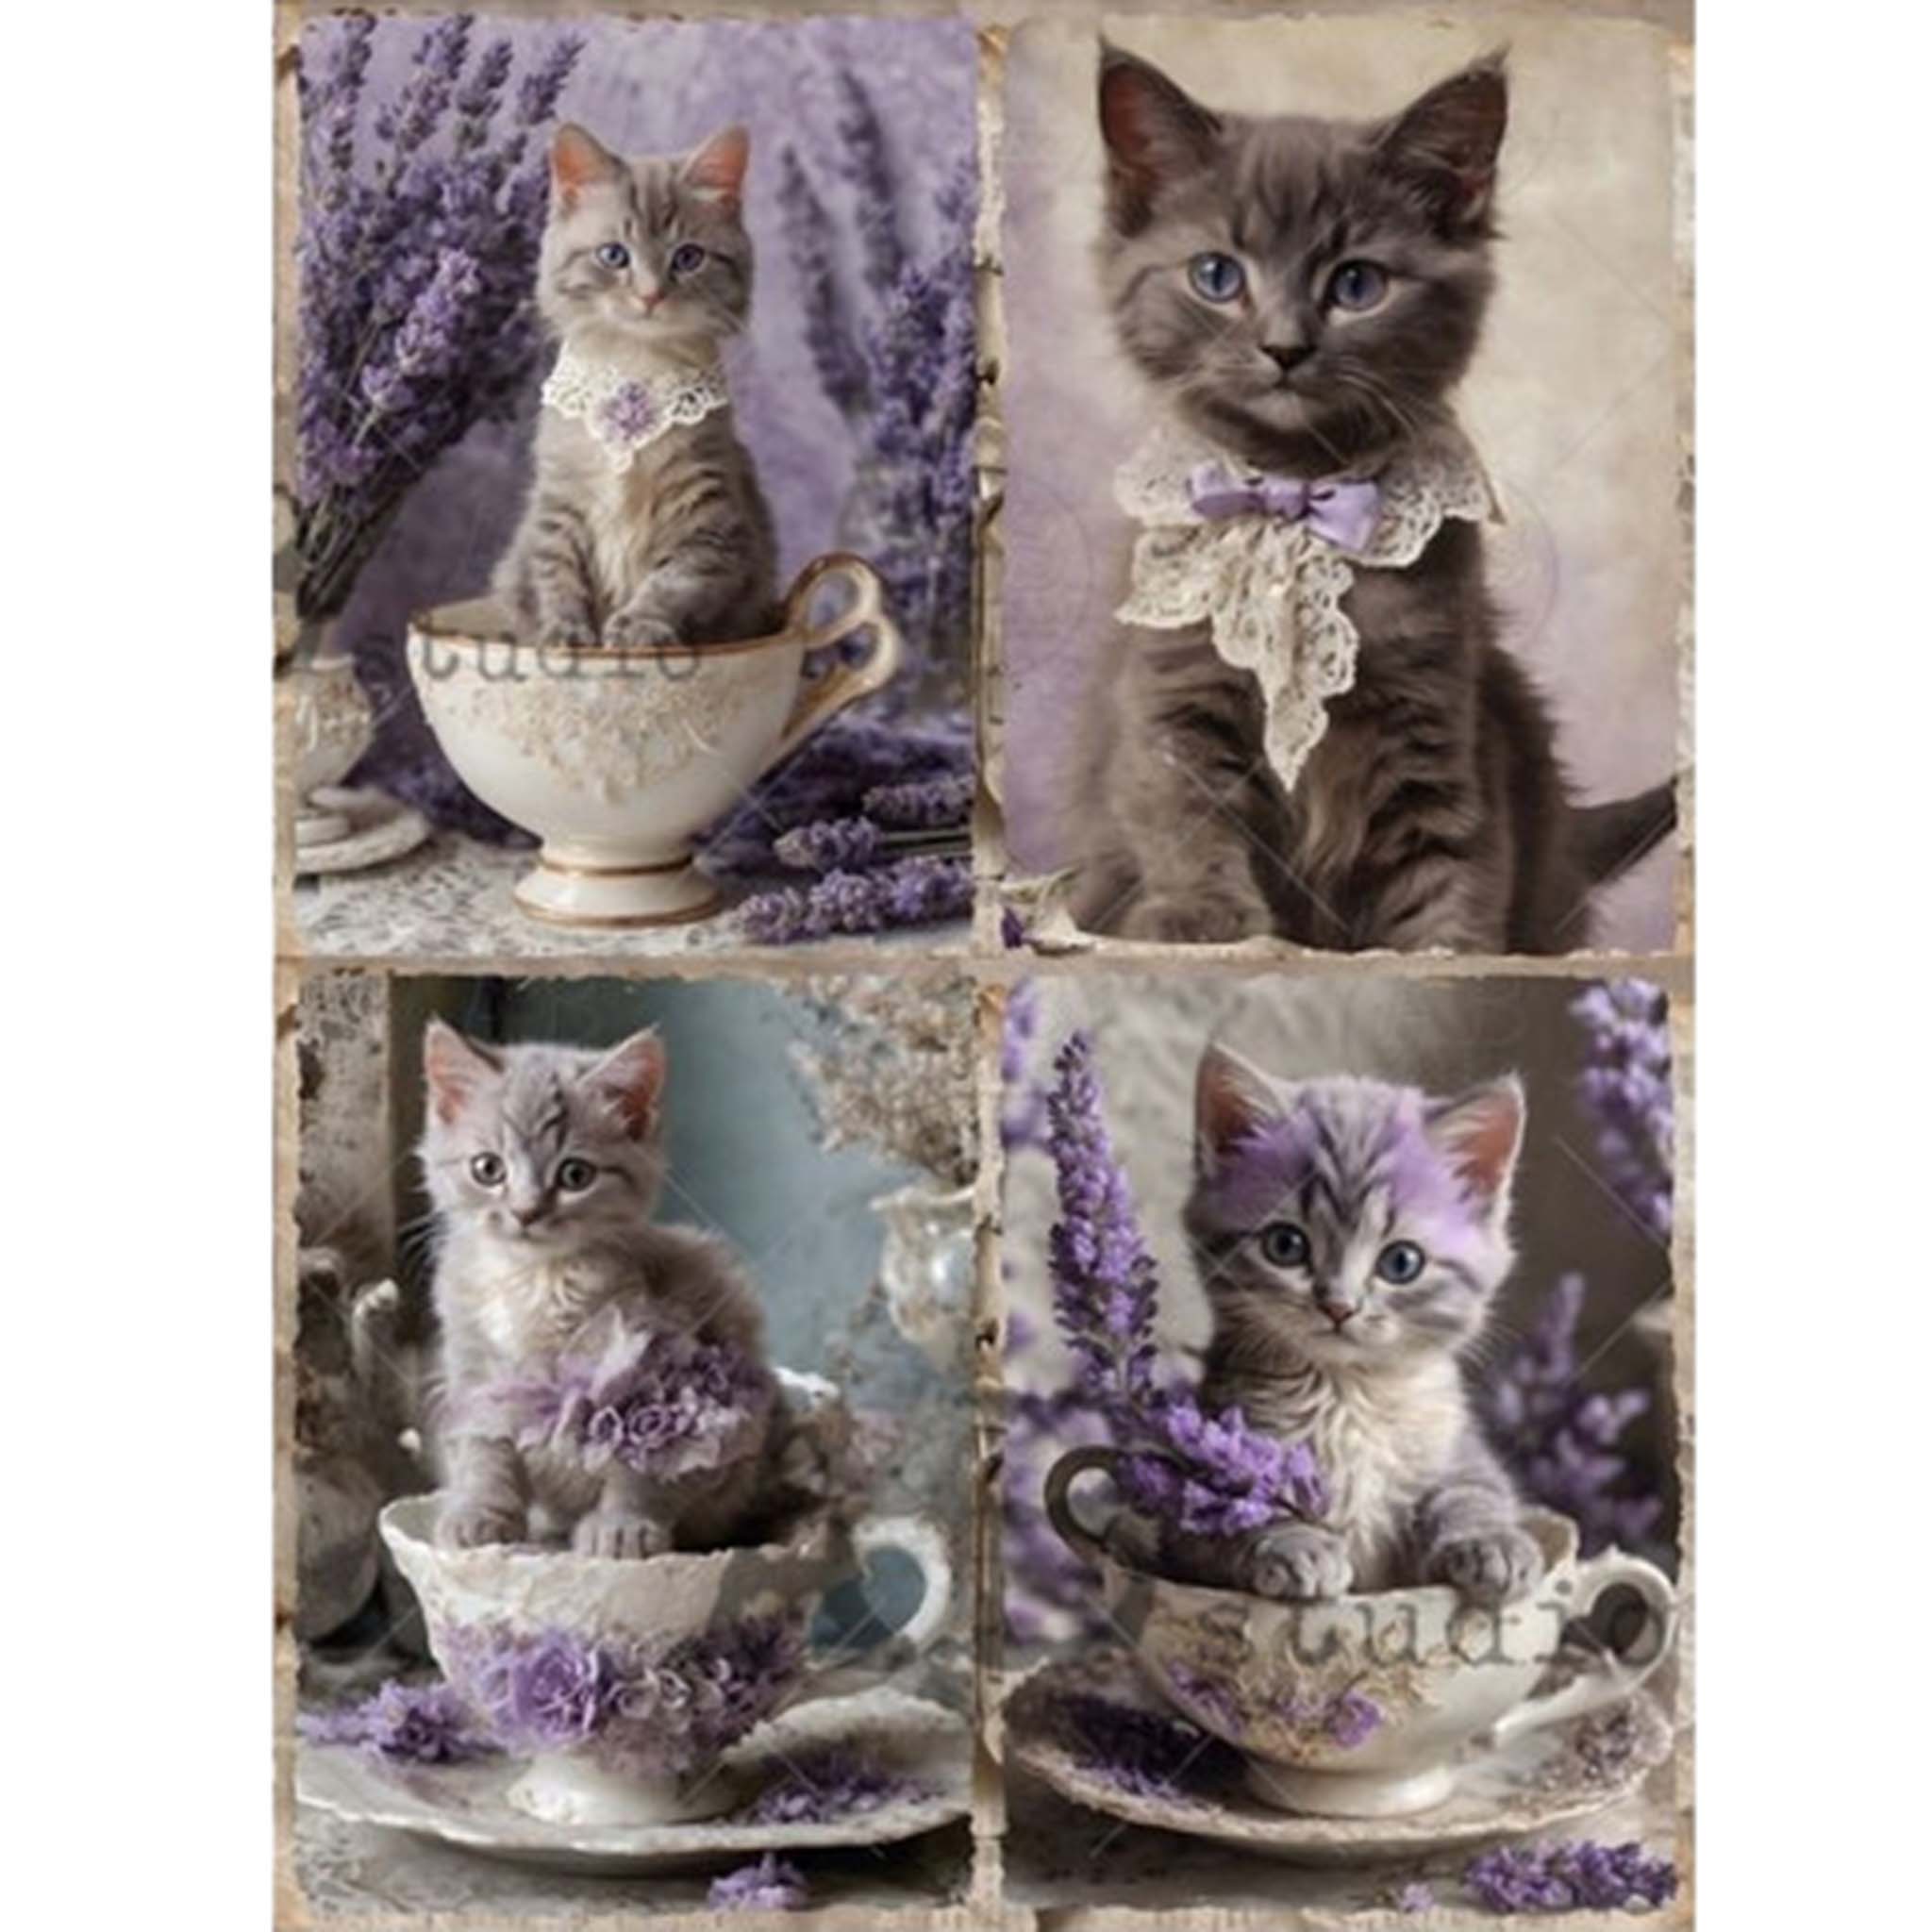 A3 rice paper that features 4 scenes of adorable gray kittens sitting in teacups with lavender flowers. White borders are on the sides.